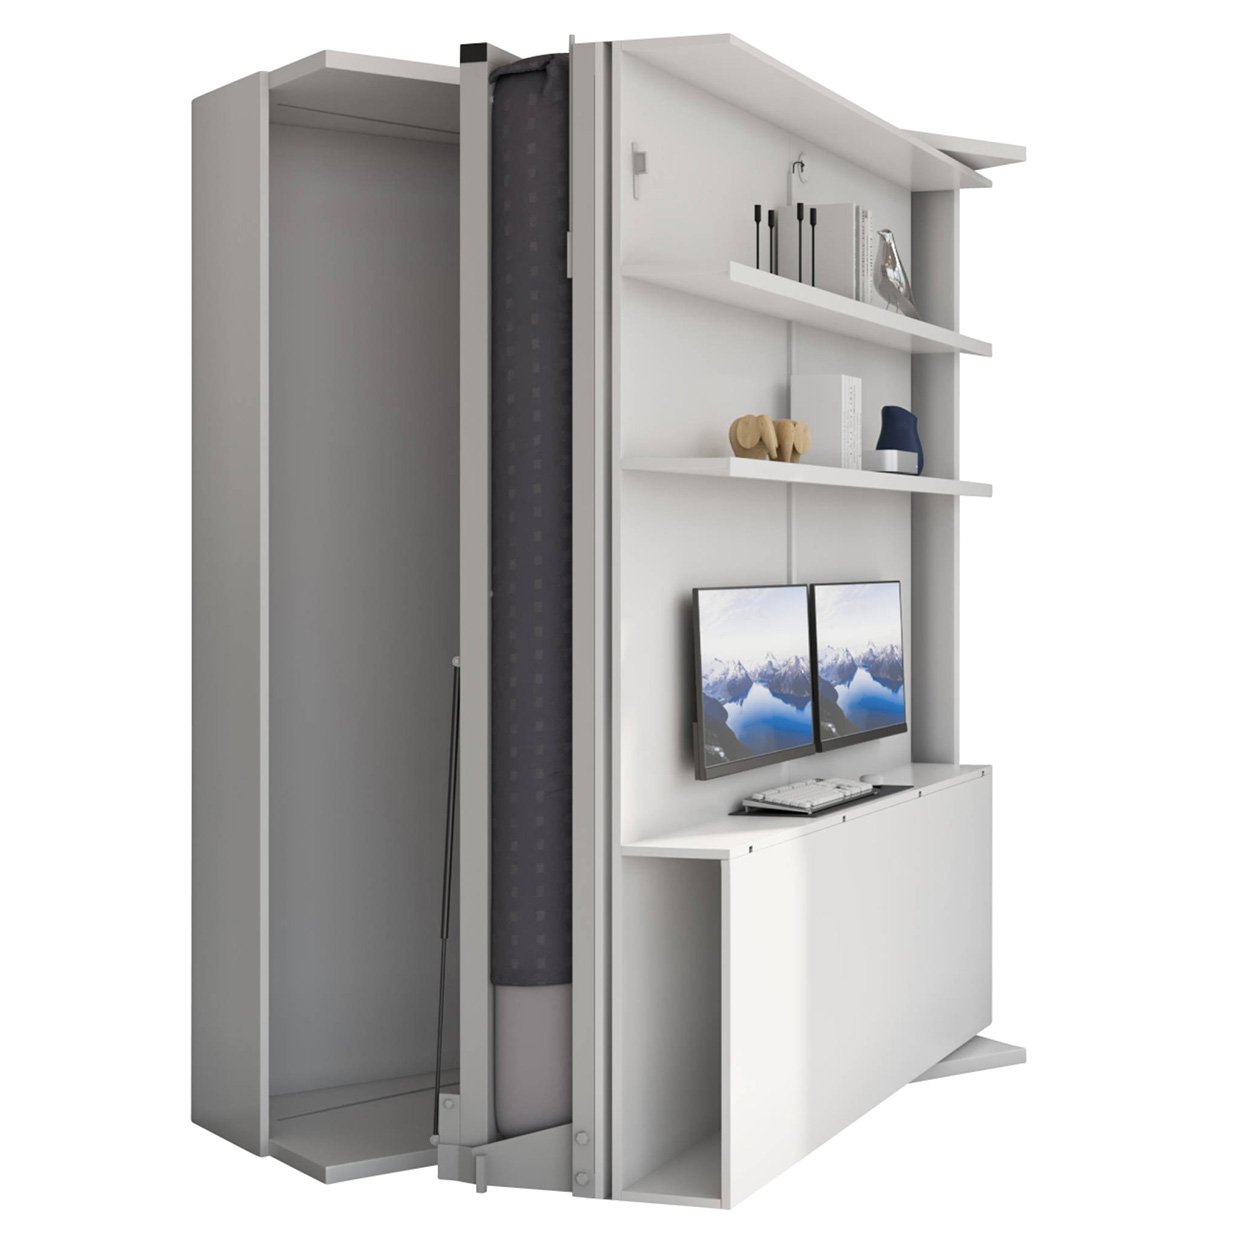 This Rotating Murphy Bed Transforms Your Bedroom Into an Office